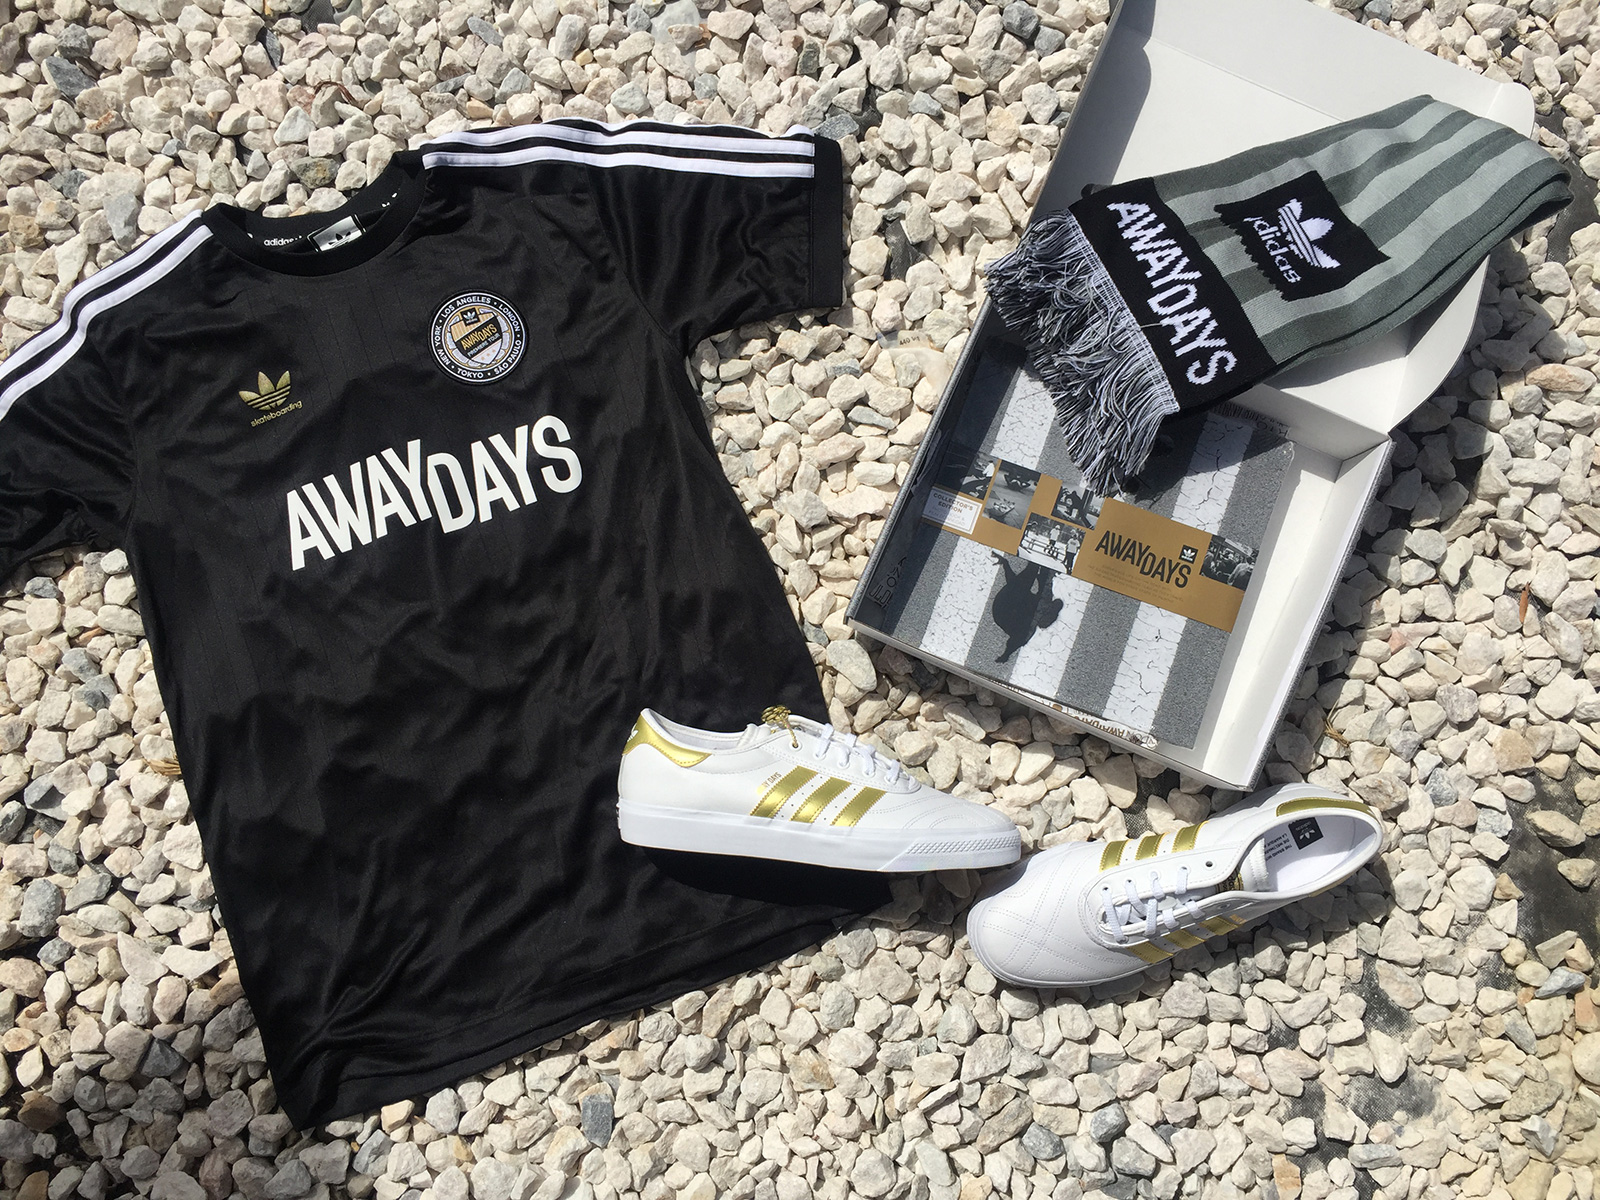 adidas-away-days-package-11